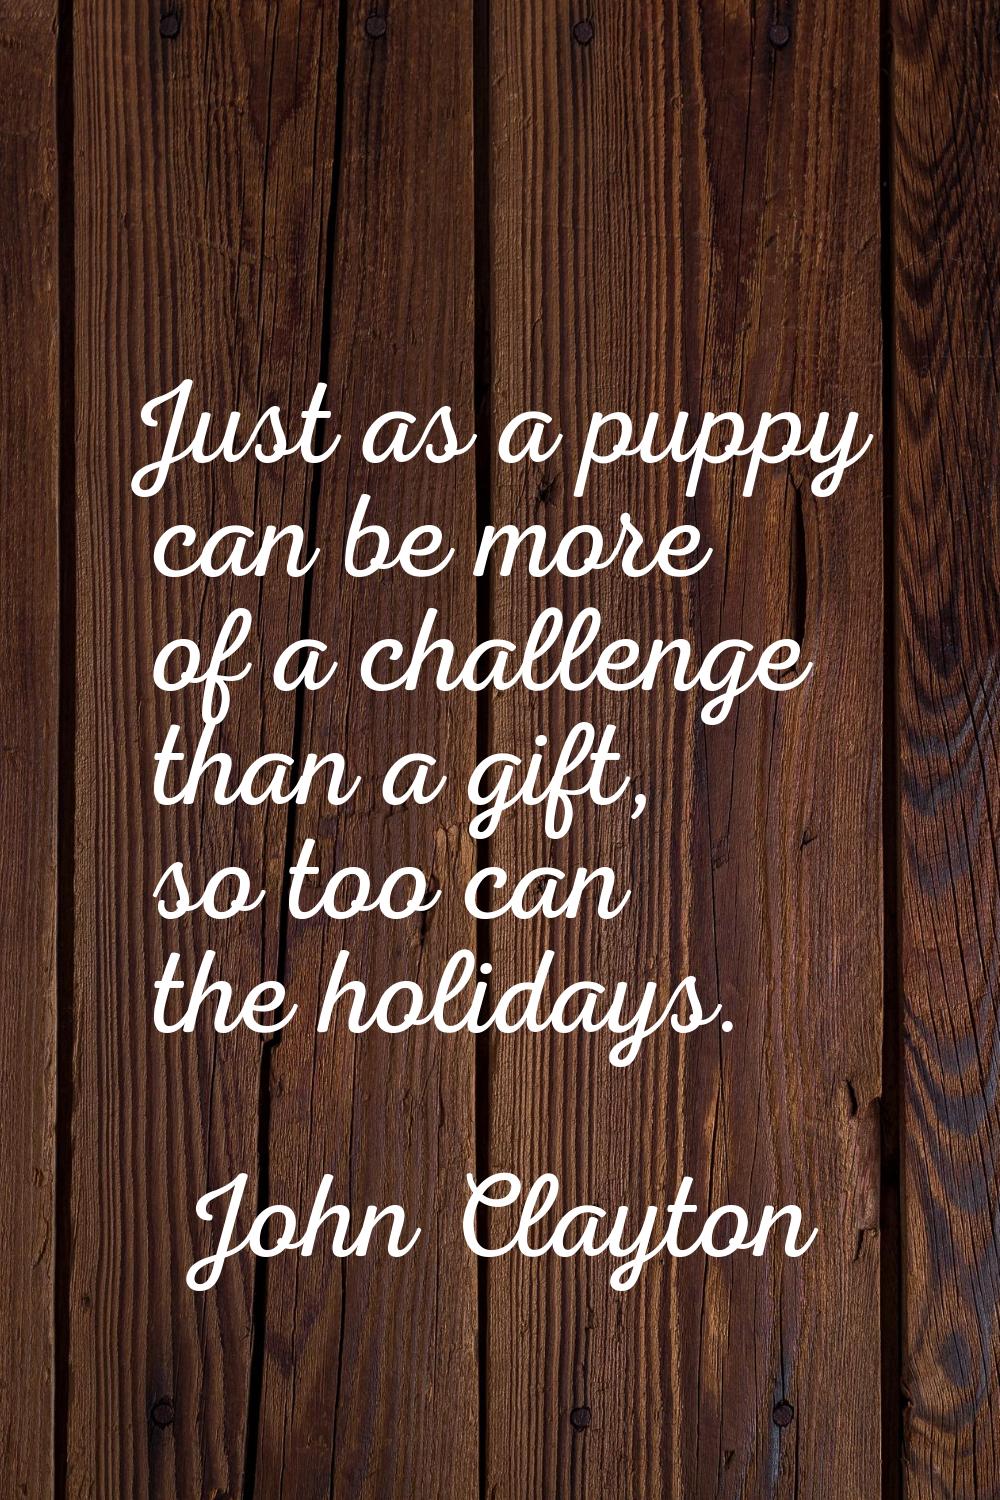 Just as a puppy can be more of a challenge than a gift, so too can the holidays.